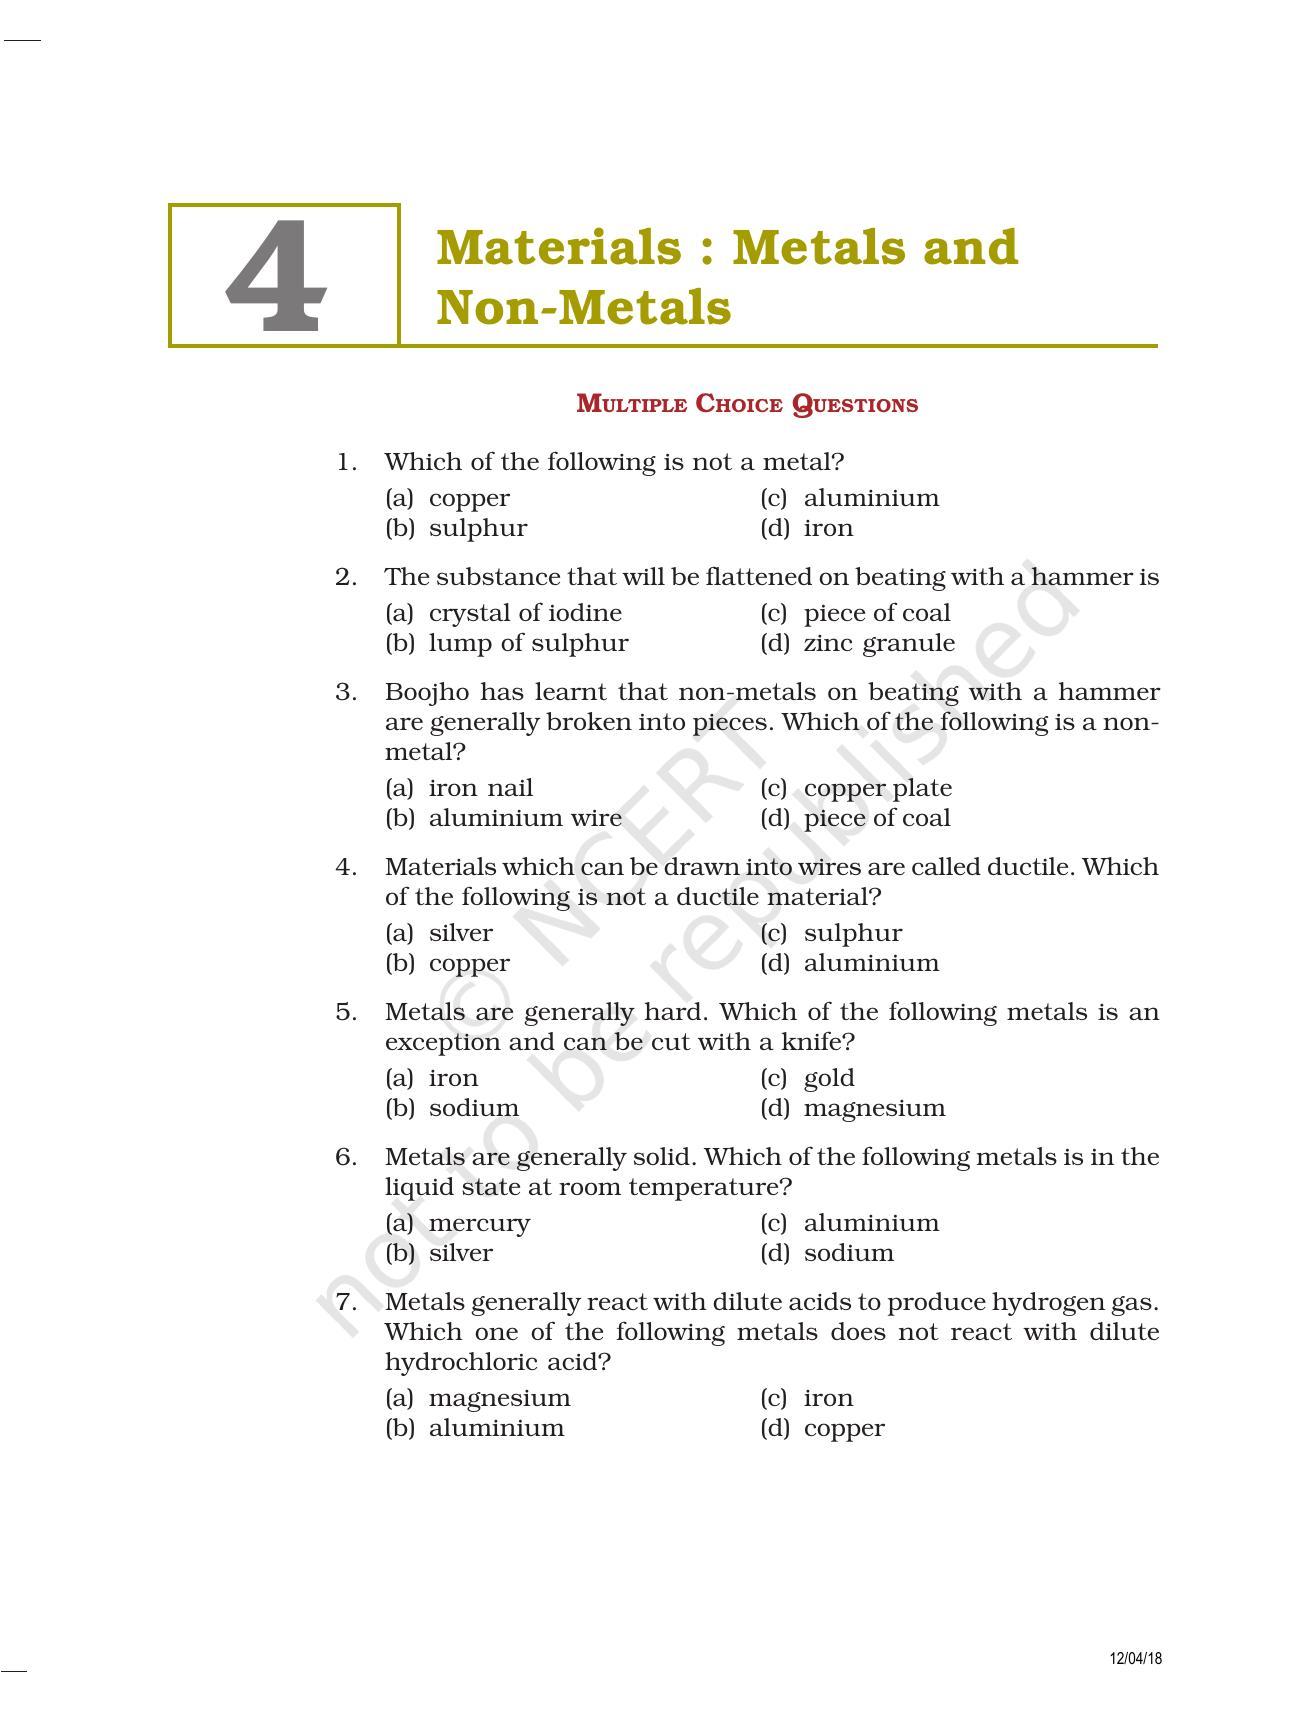 NCERT Exemplar Book for Class 8 Science: Chapter 4- Materials : Metals and Non-Metals - Page 1